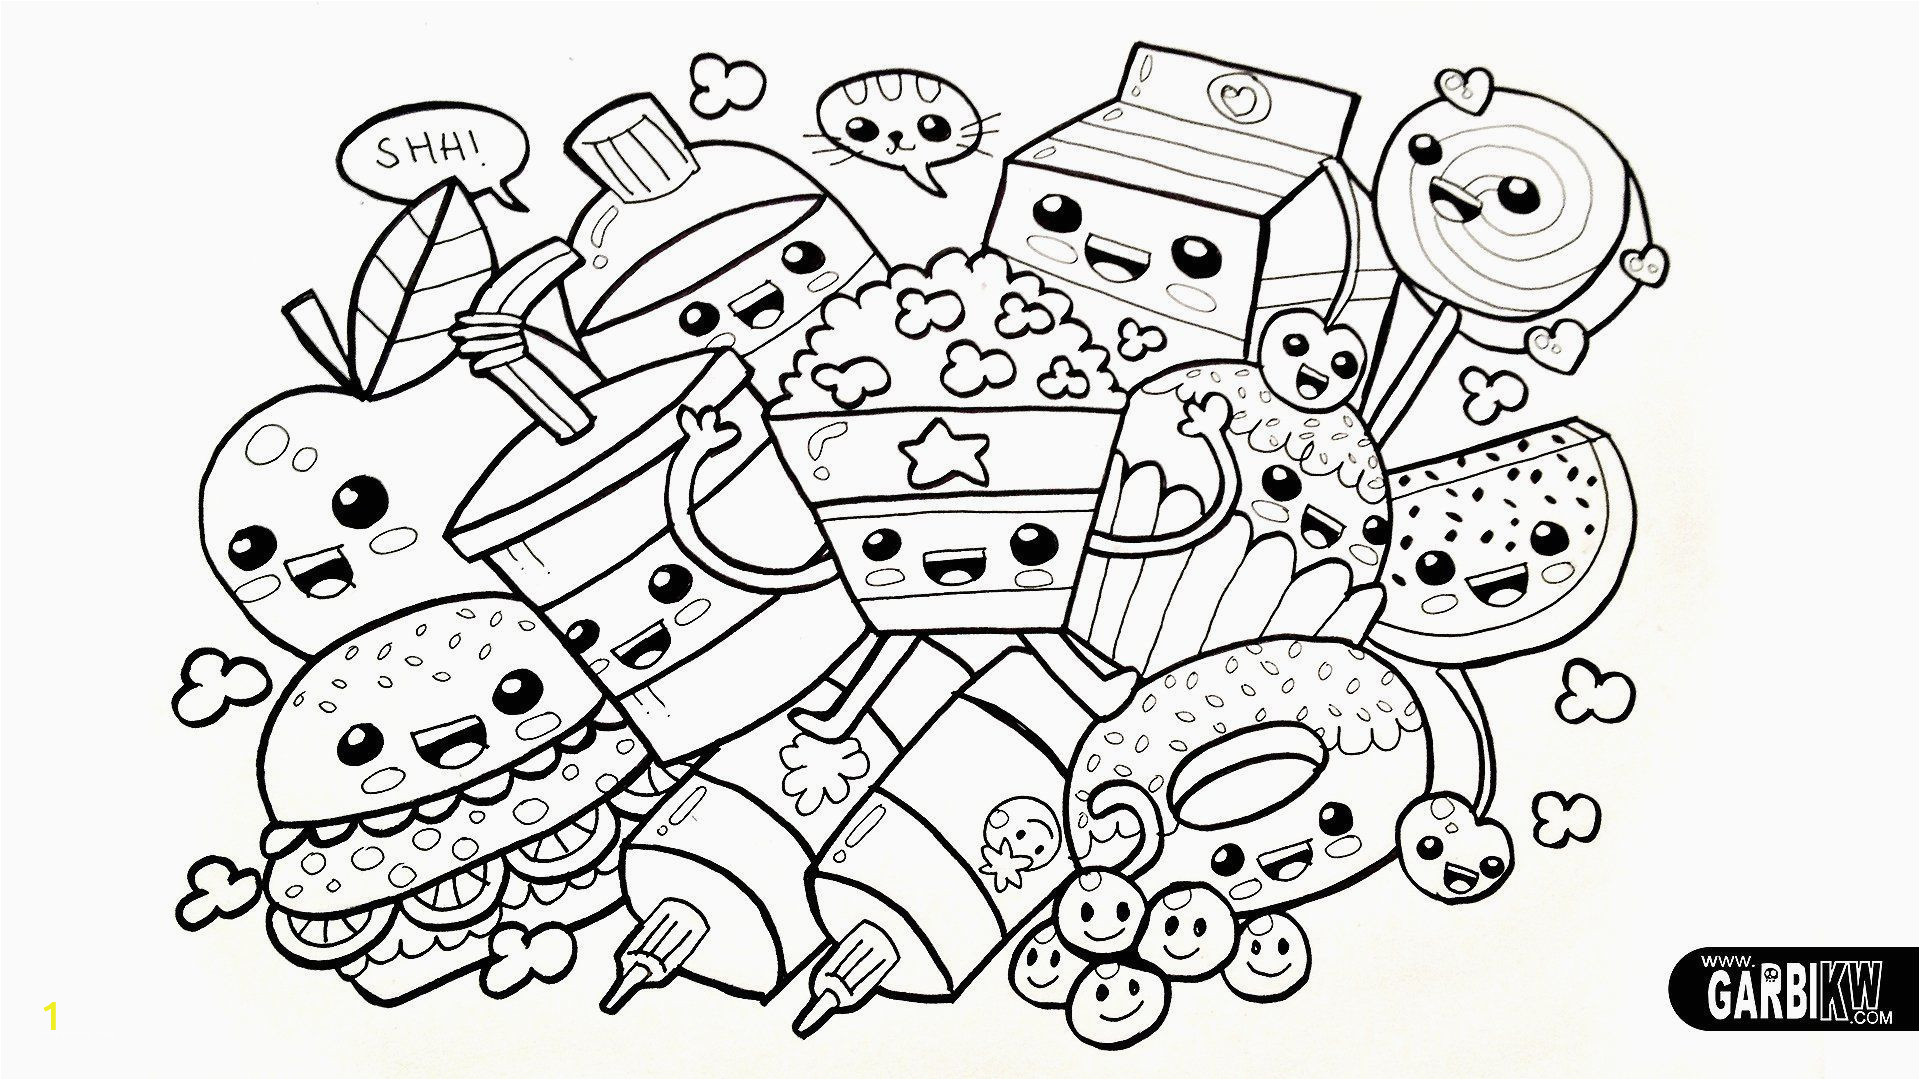 free online printable coloring pages best of coloring pages cartoons printable in 2020 of free online printable coloring pages